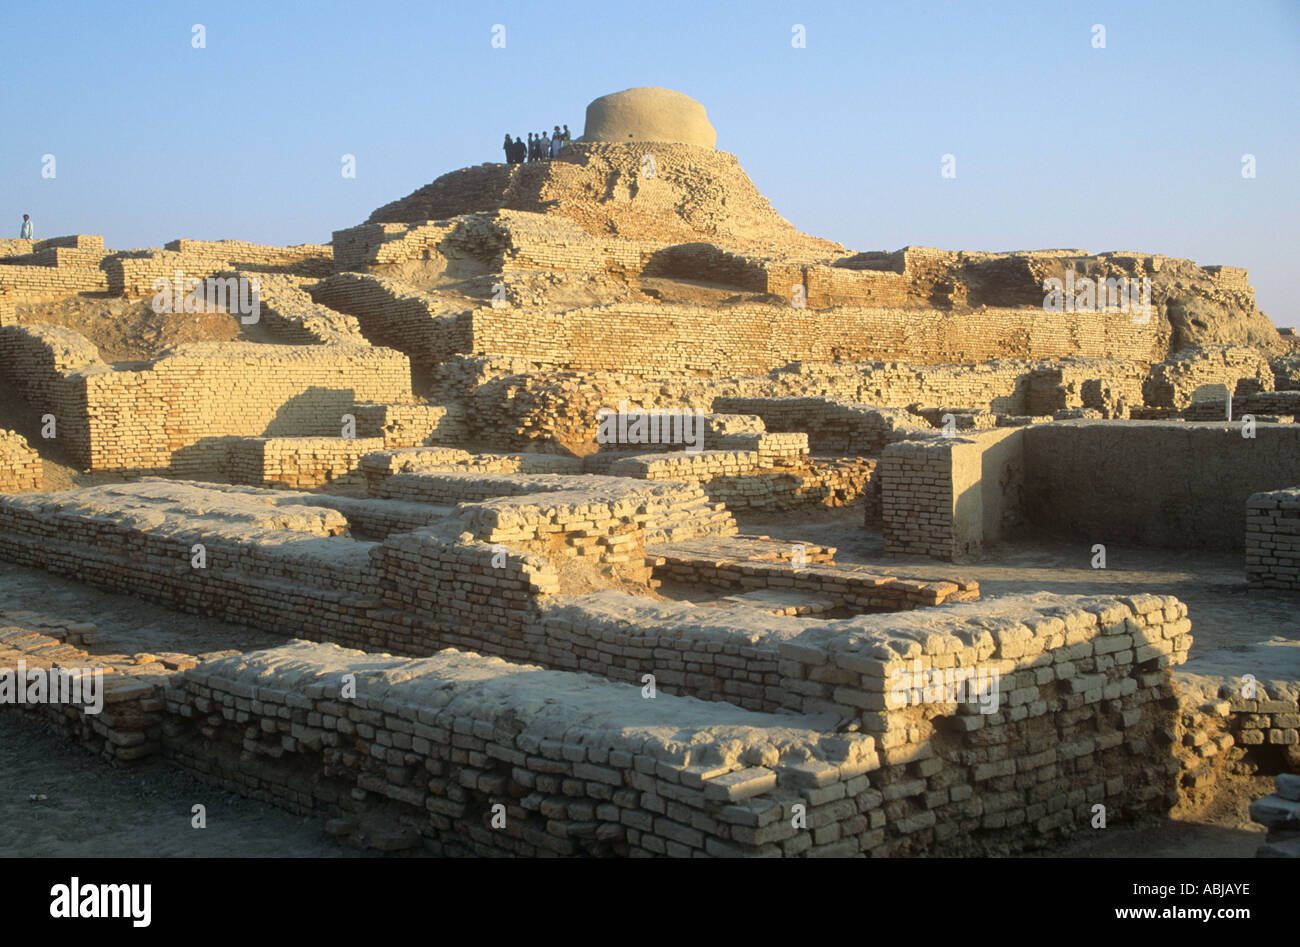 Broad view of  the ancient Indus Valley city of Mohenjodaro with the much later Buddhist stupa on the horizon. Stock Photo